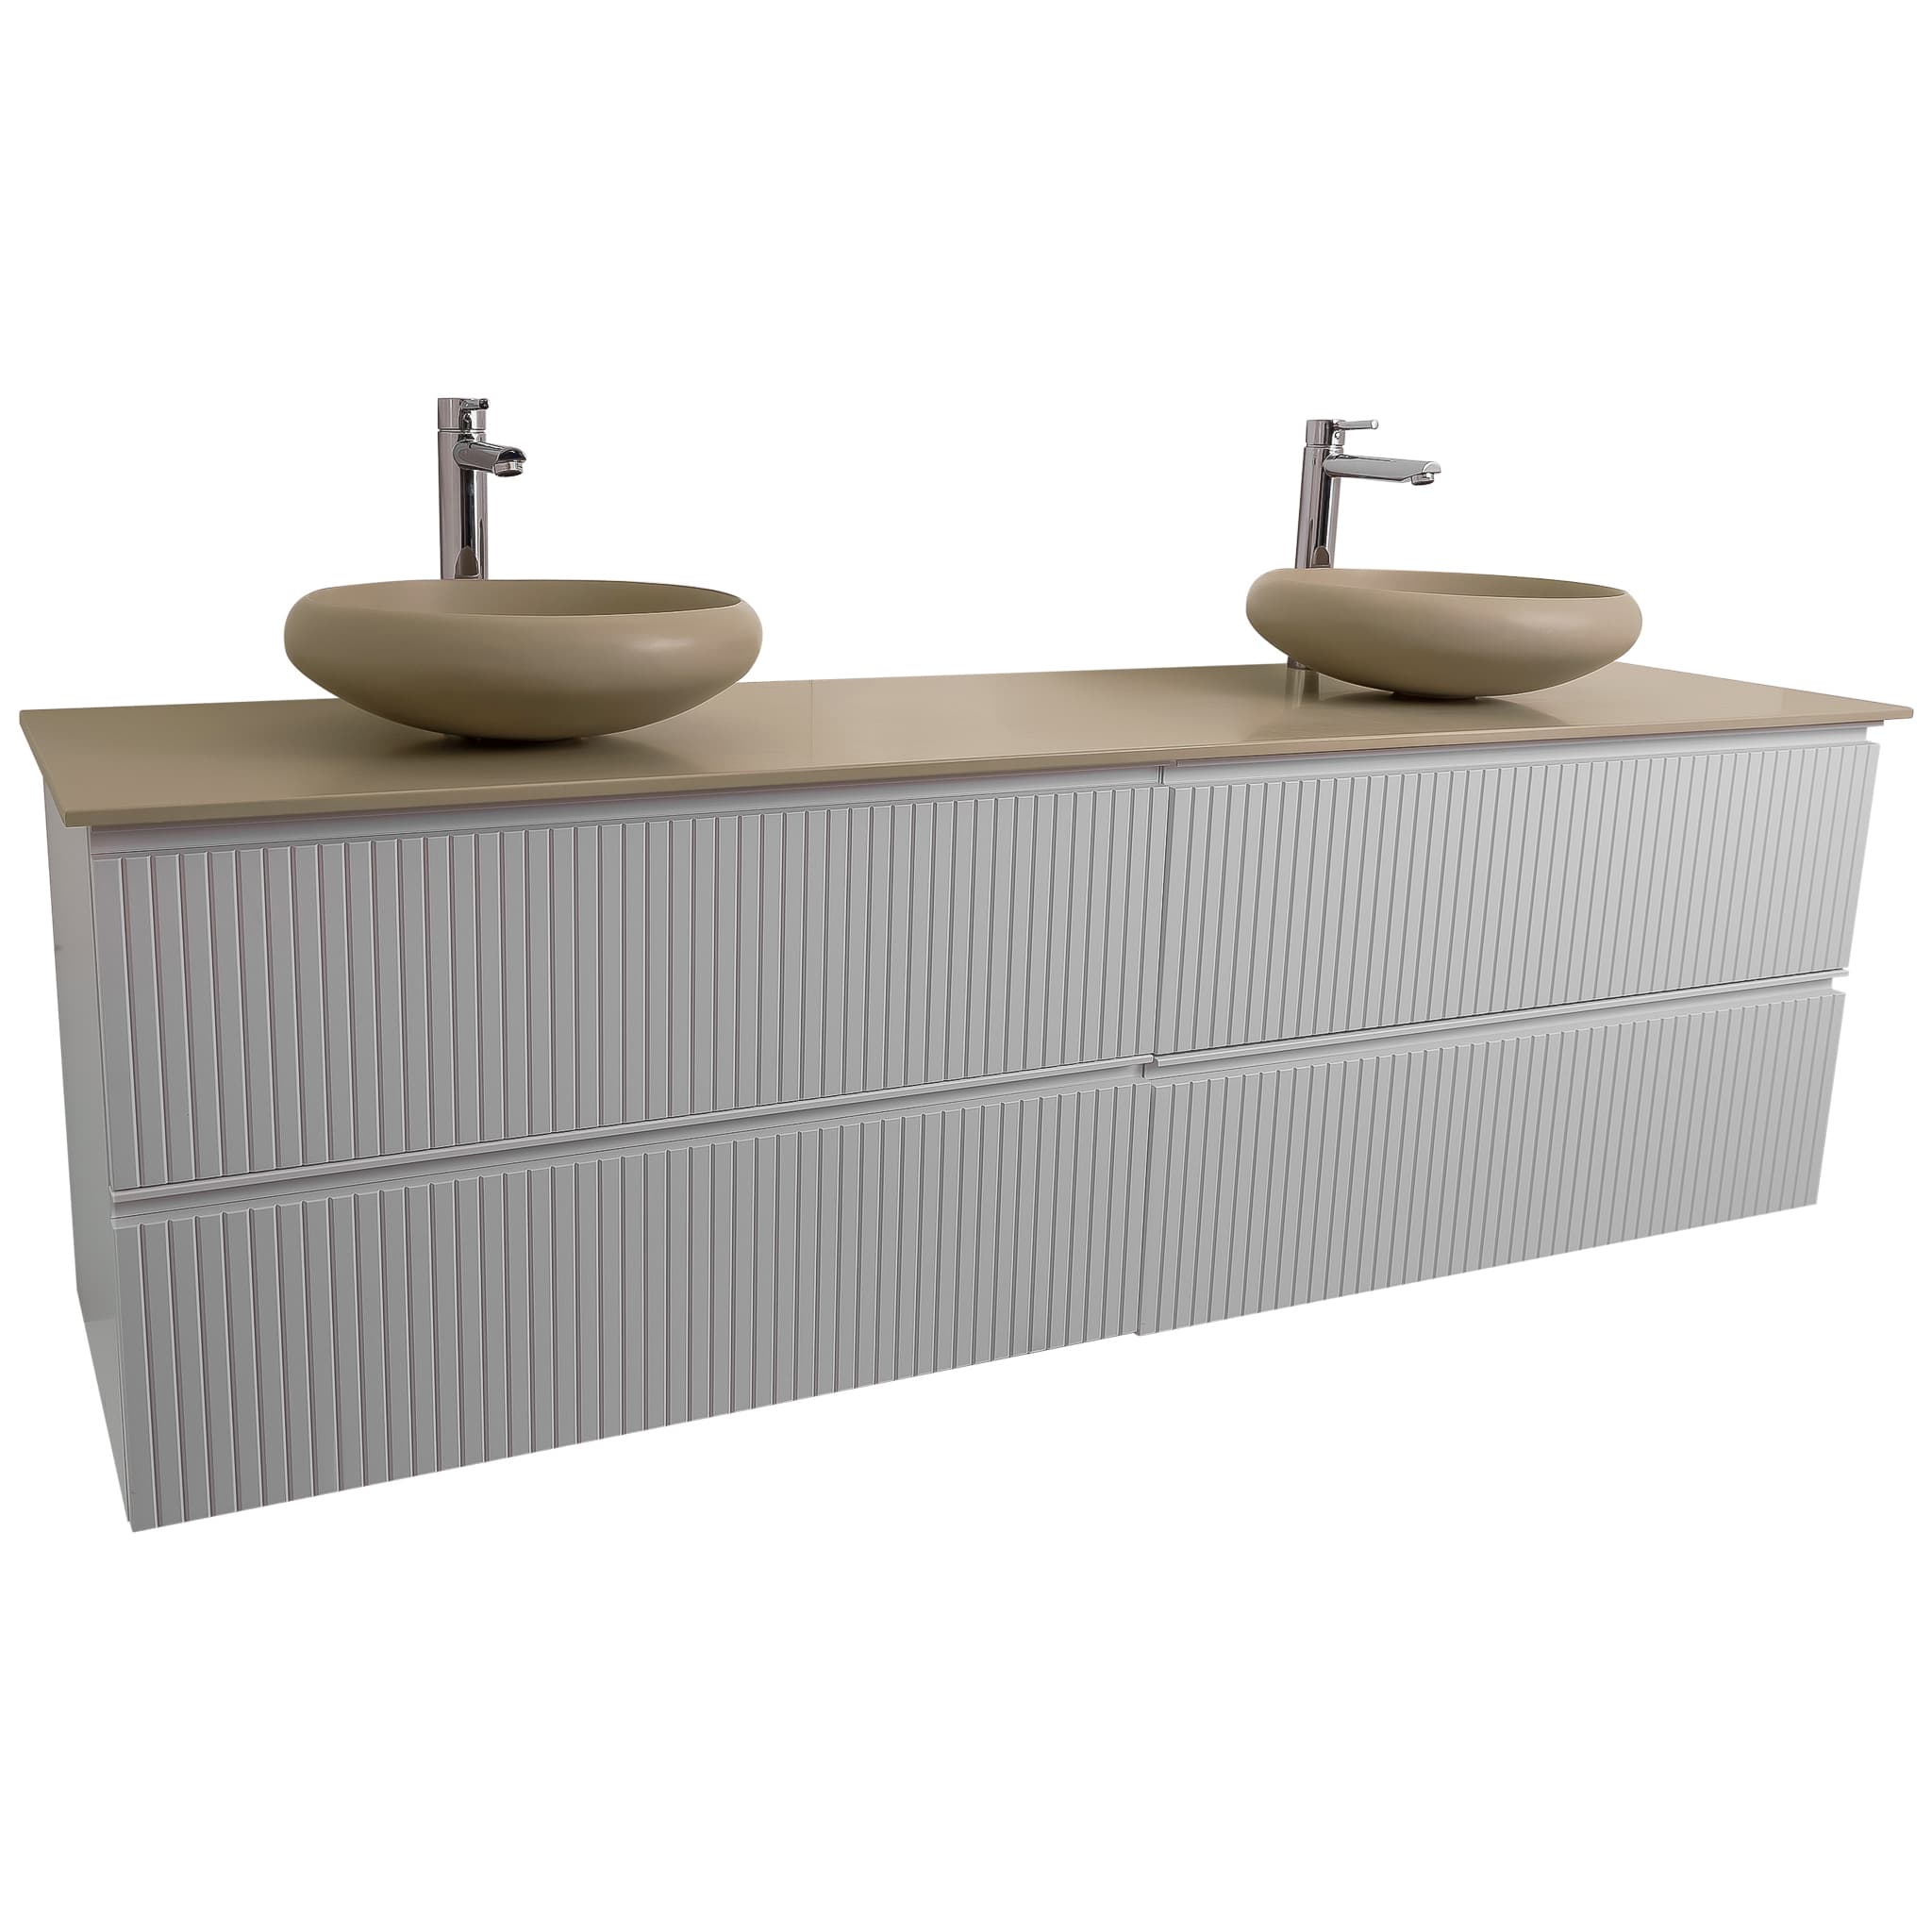 Ares 63 Matte White Cabinet, Solid Surface Flat Taupe Counter And Two Round Solid Surface Taupe Basin 1153, Wall Mounted Modern Vanity Set